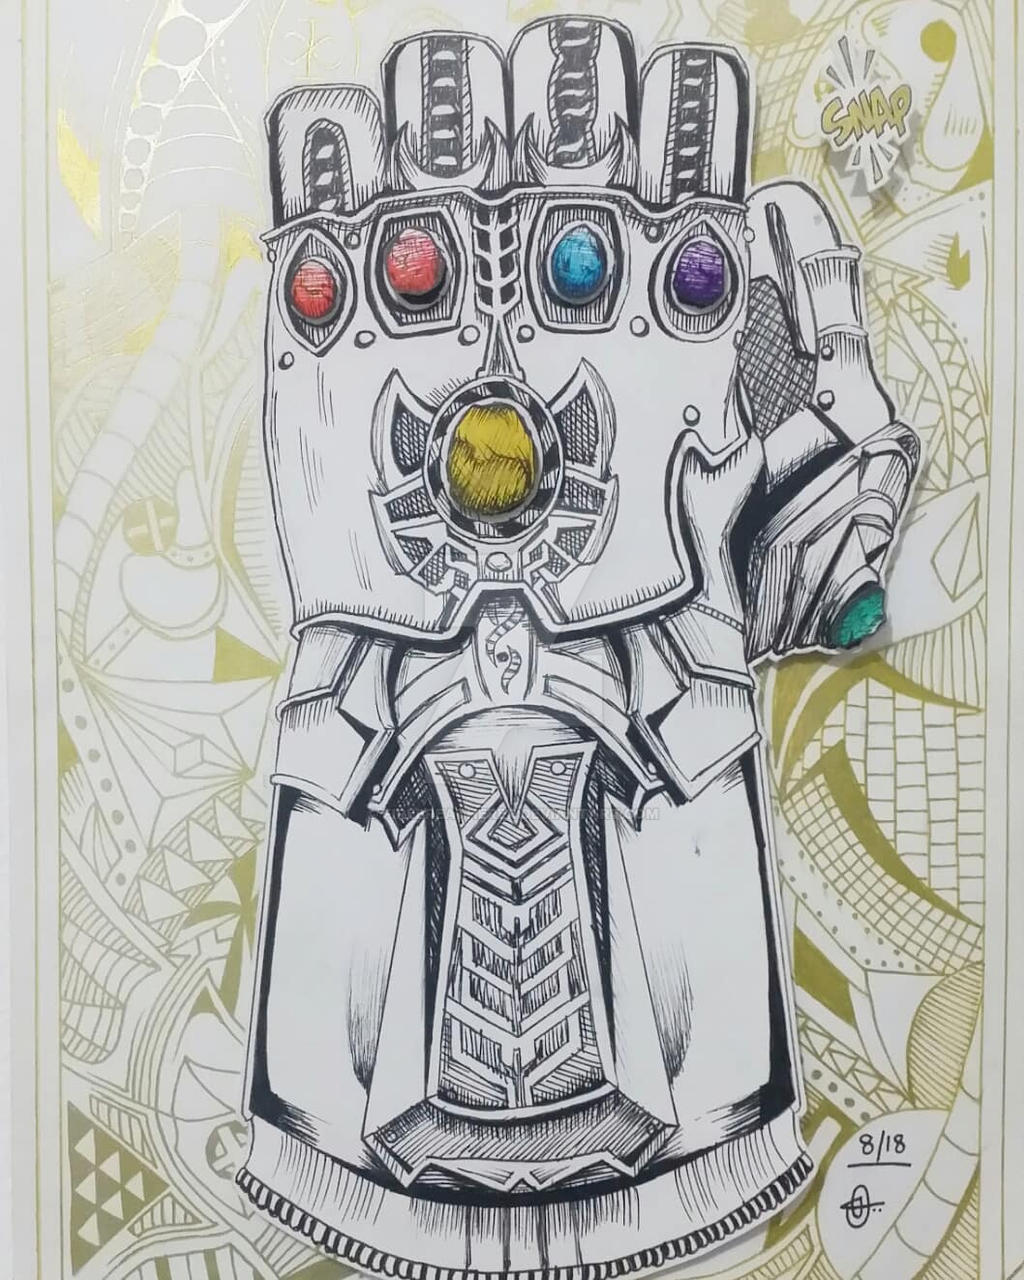 Infinity Gauntlet Abstract by FIREBREATHERER on DeviantArt